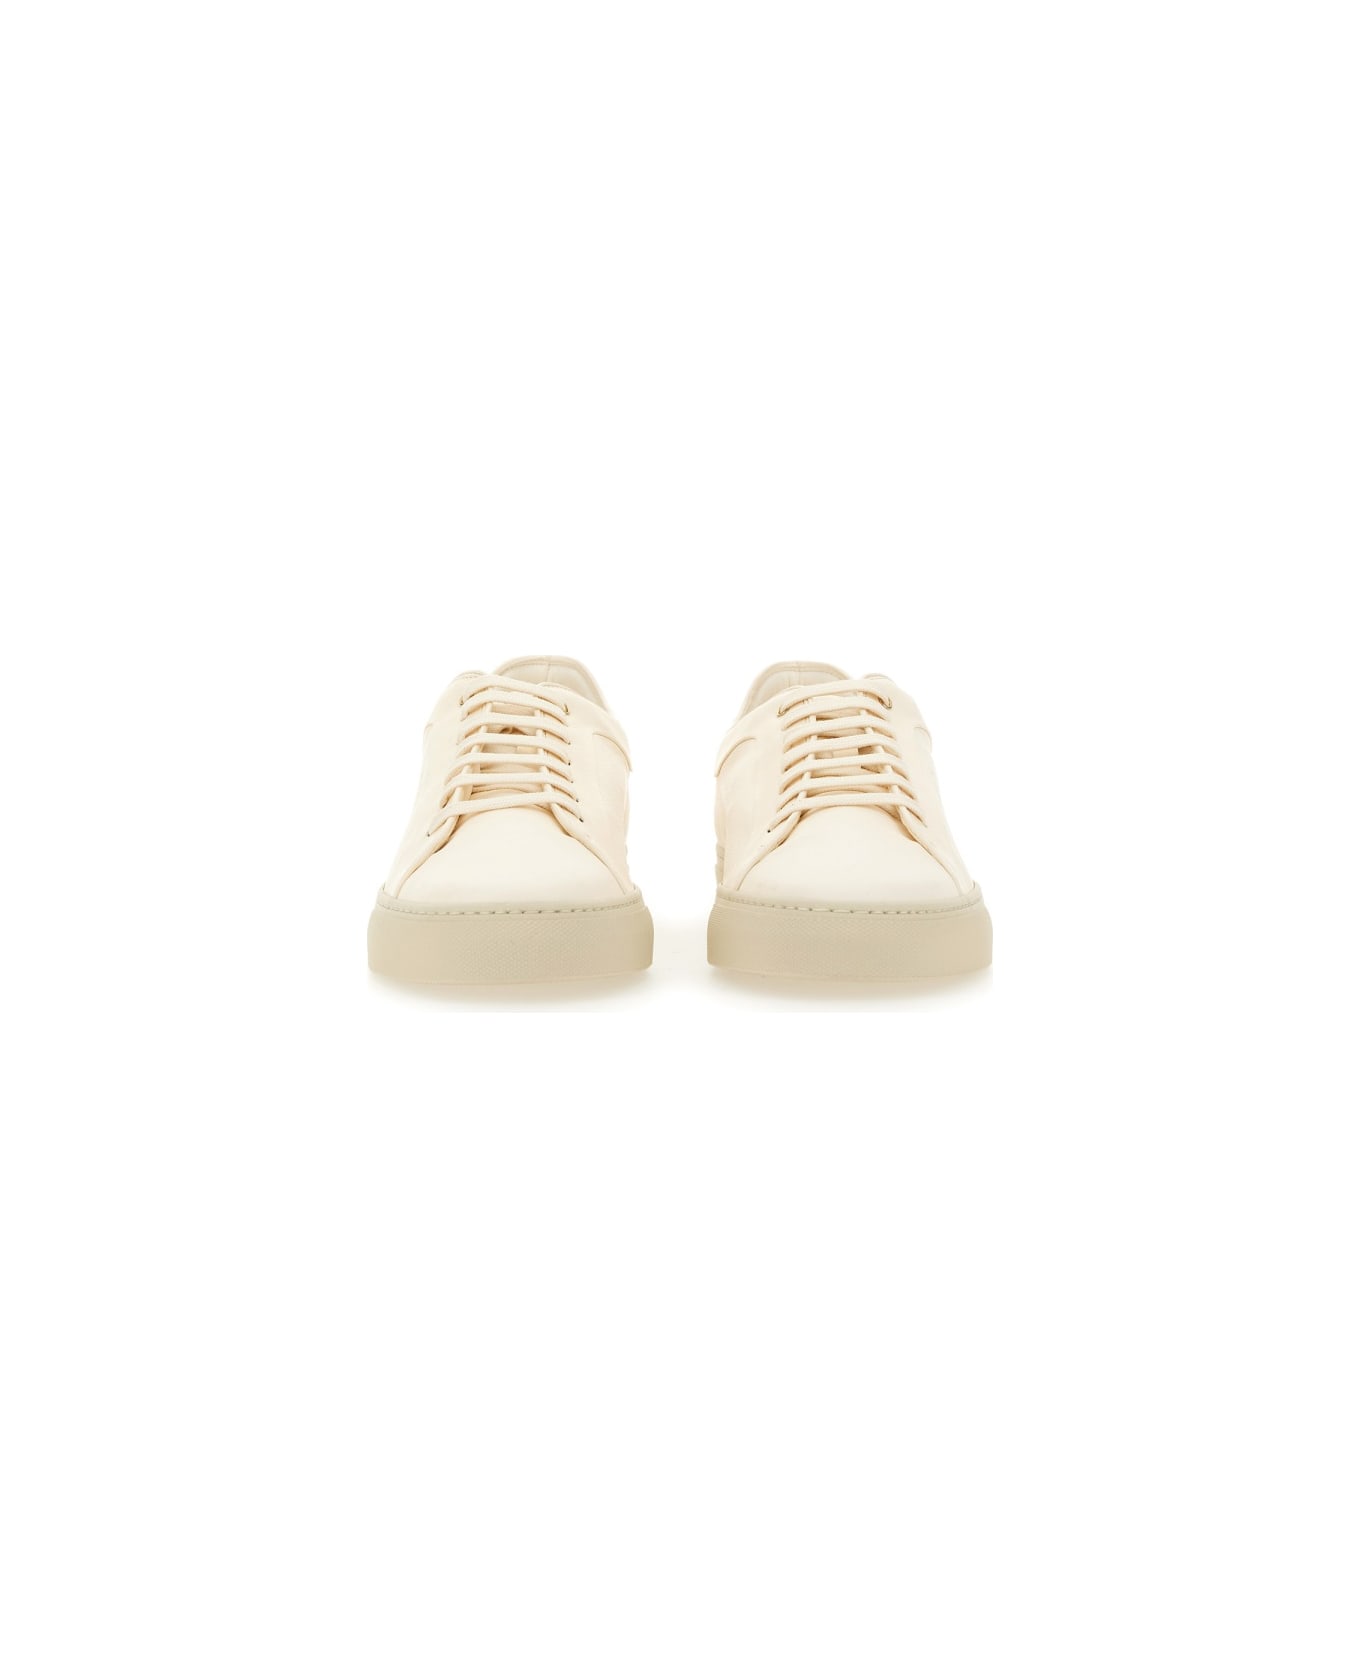 Paul Smith Leather Sneaker - IVORY スニーカー